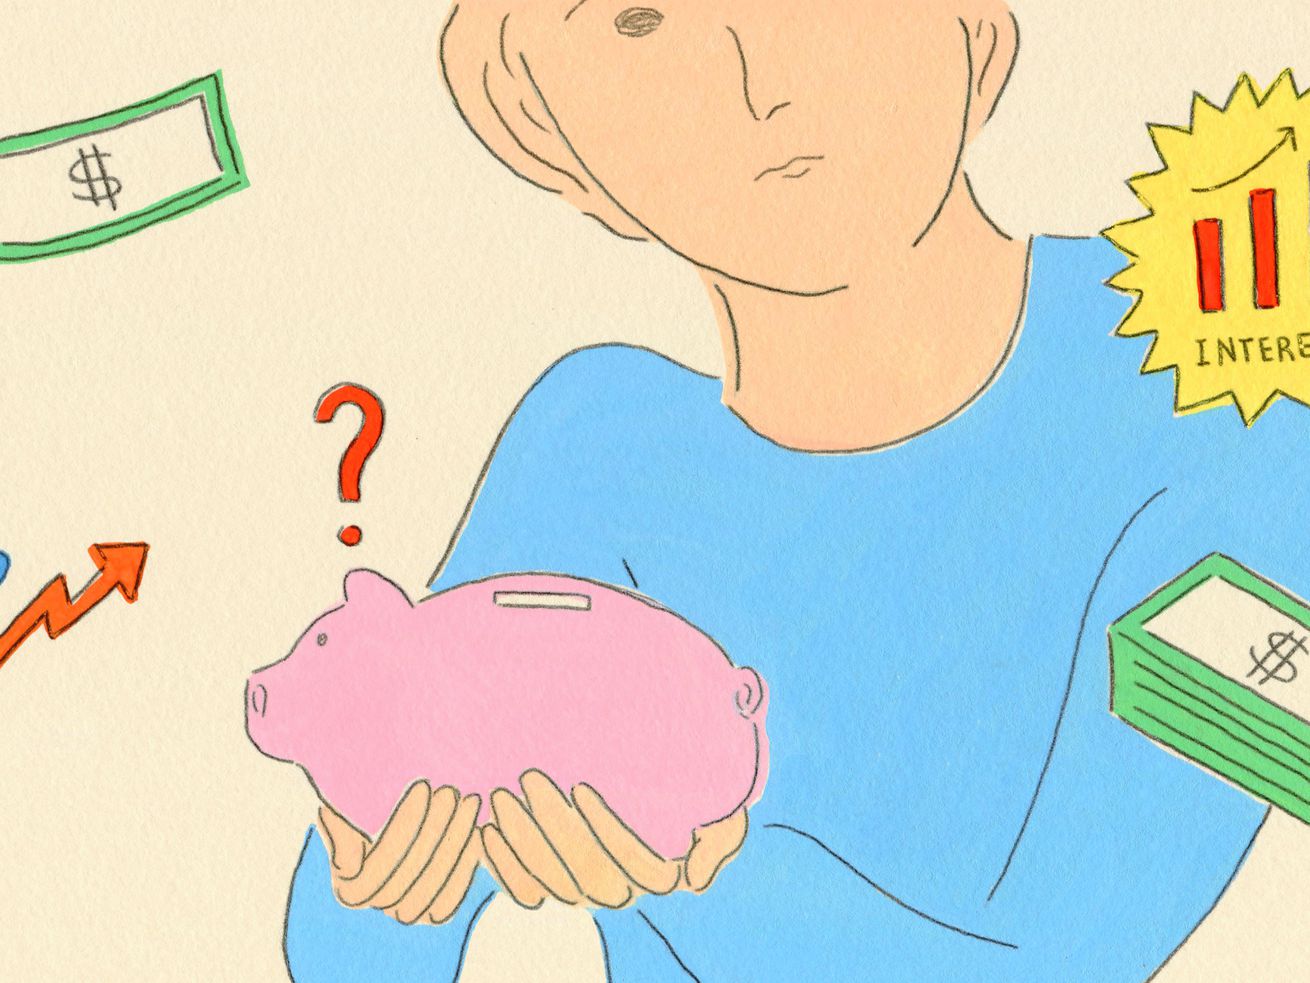 How to start saving and investing money — even amid economic uncertainty